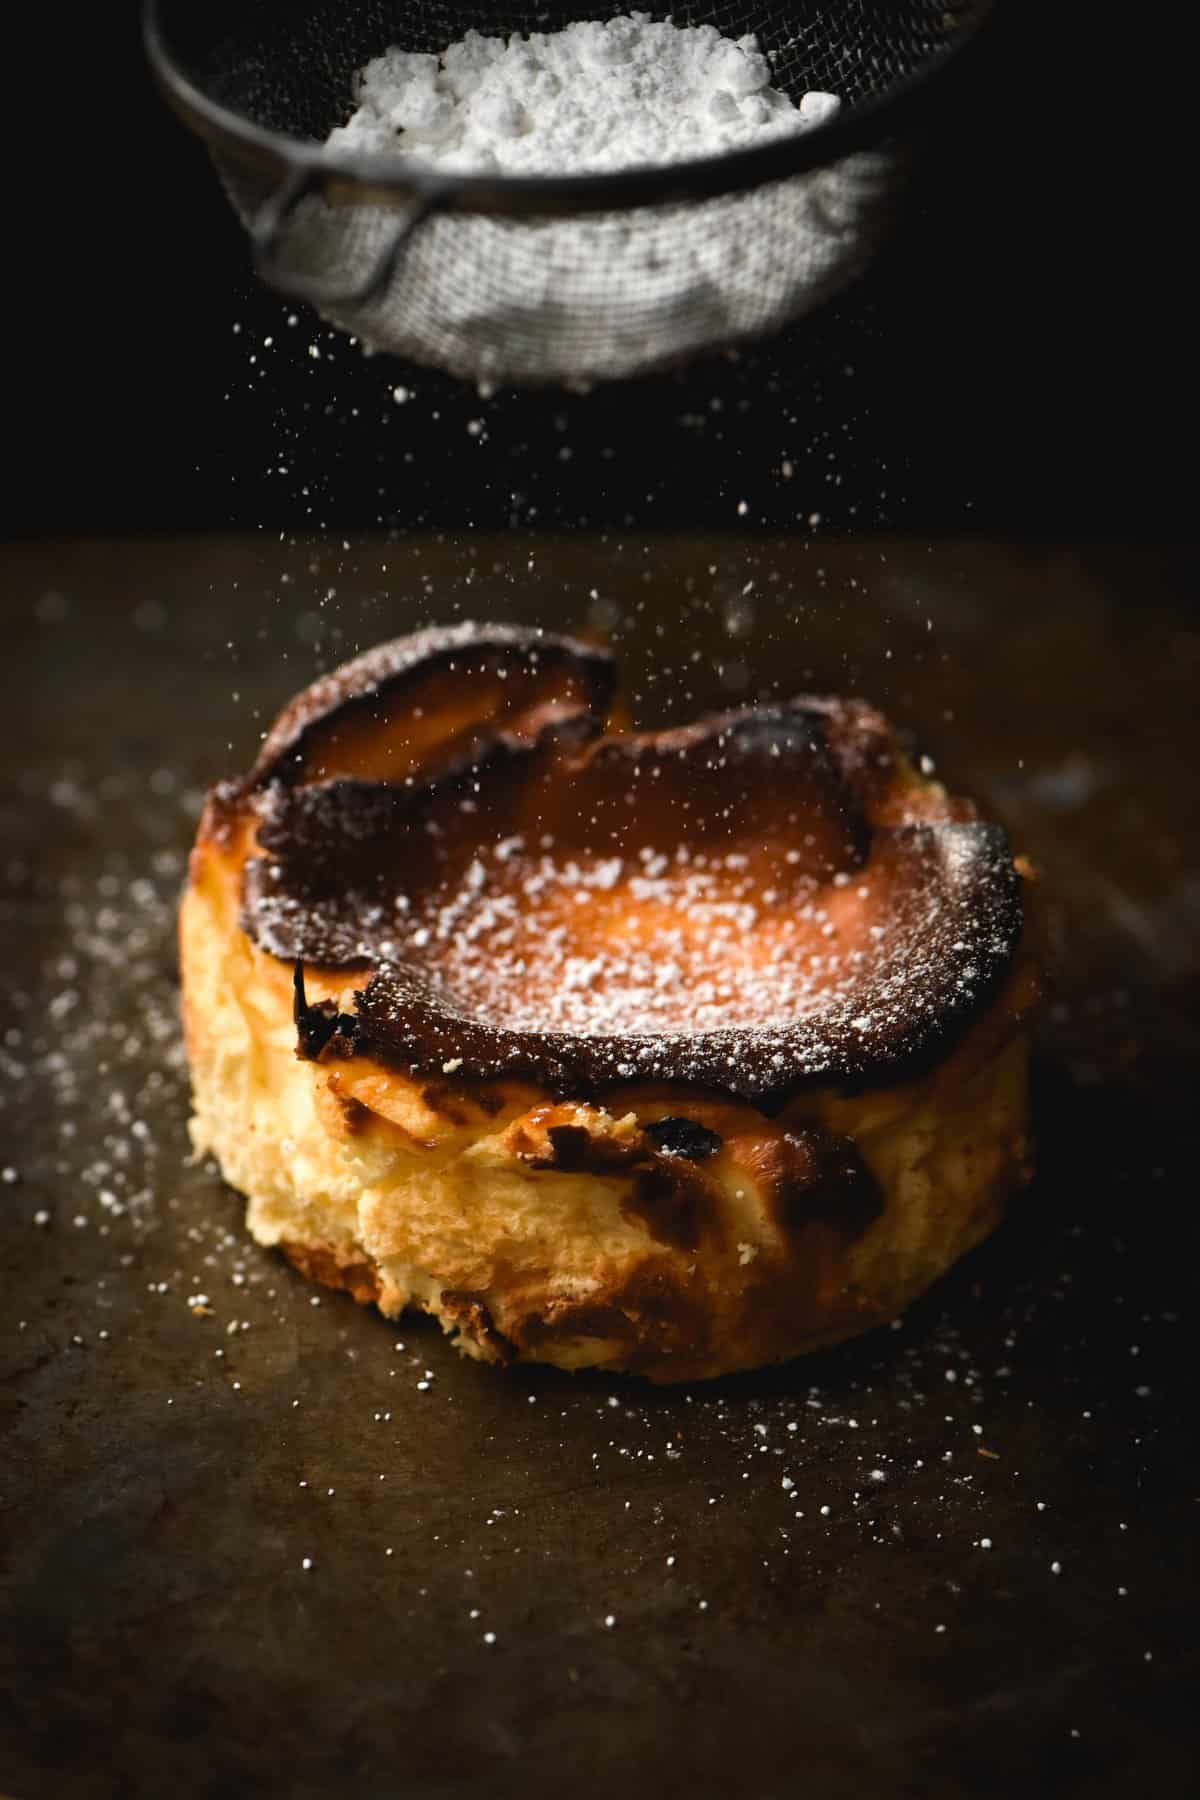 A side on view of a mini gluten free cheesecake being sprinkled with icing sugar against a dark metal backdrop